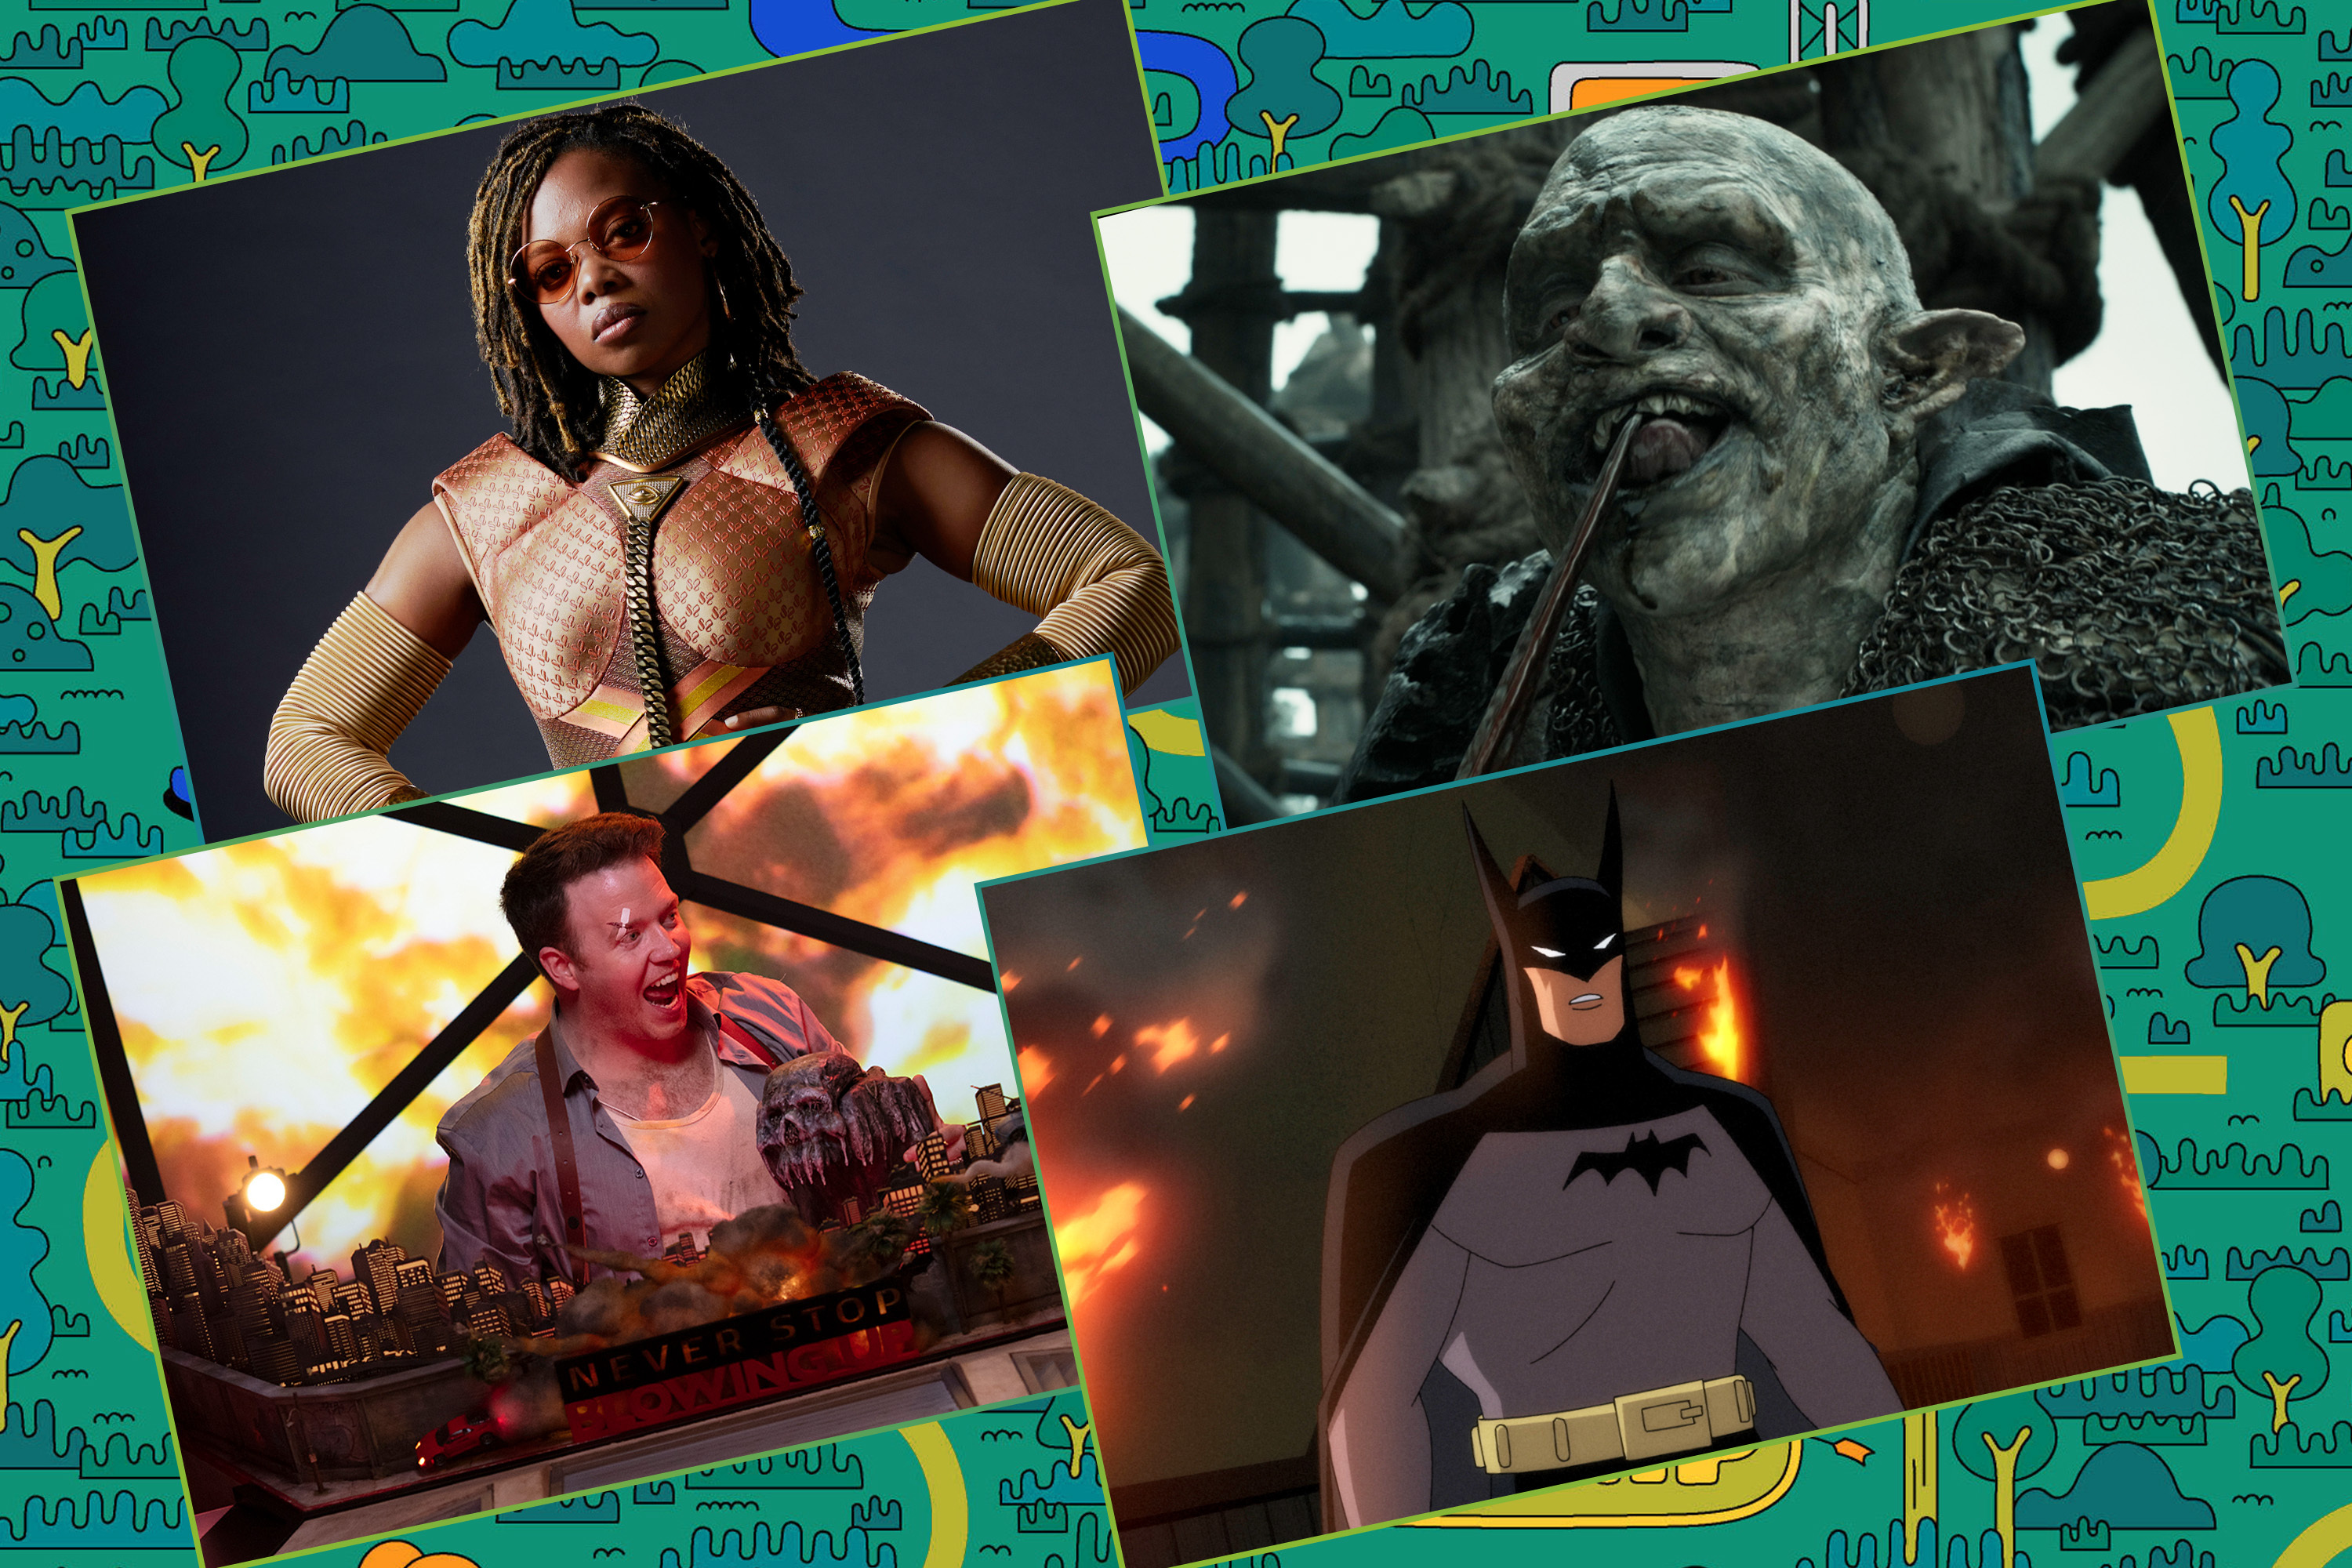 A collage of images from TV coming out this summer, including a Tolkien orc, Batman, and Brennan Lee Mulligan.